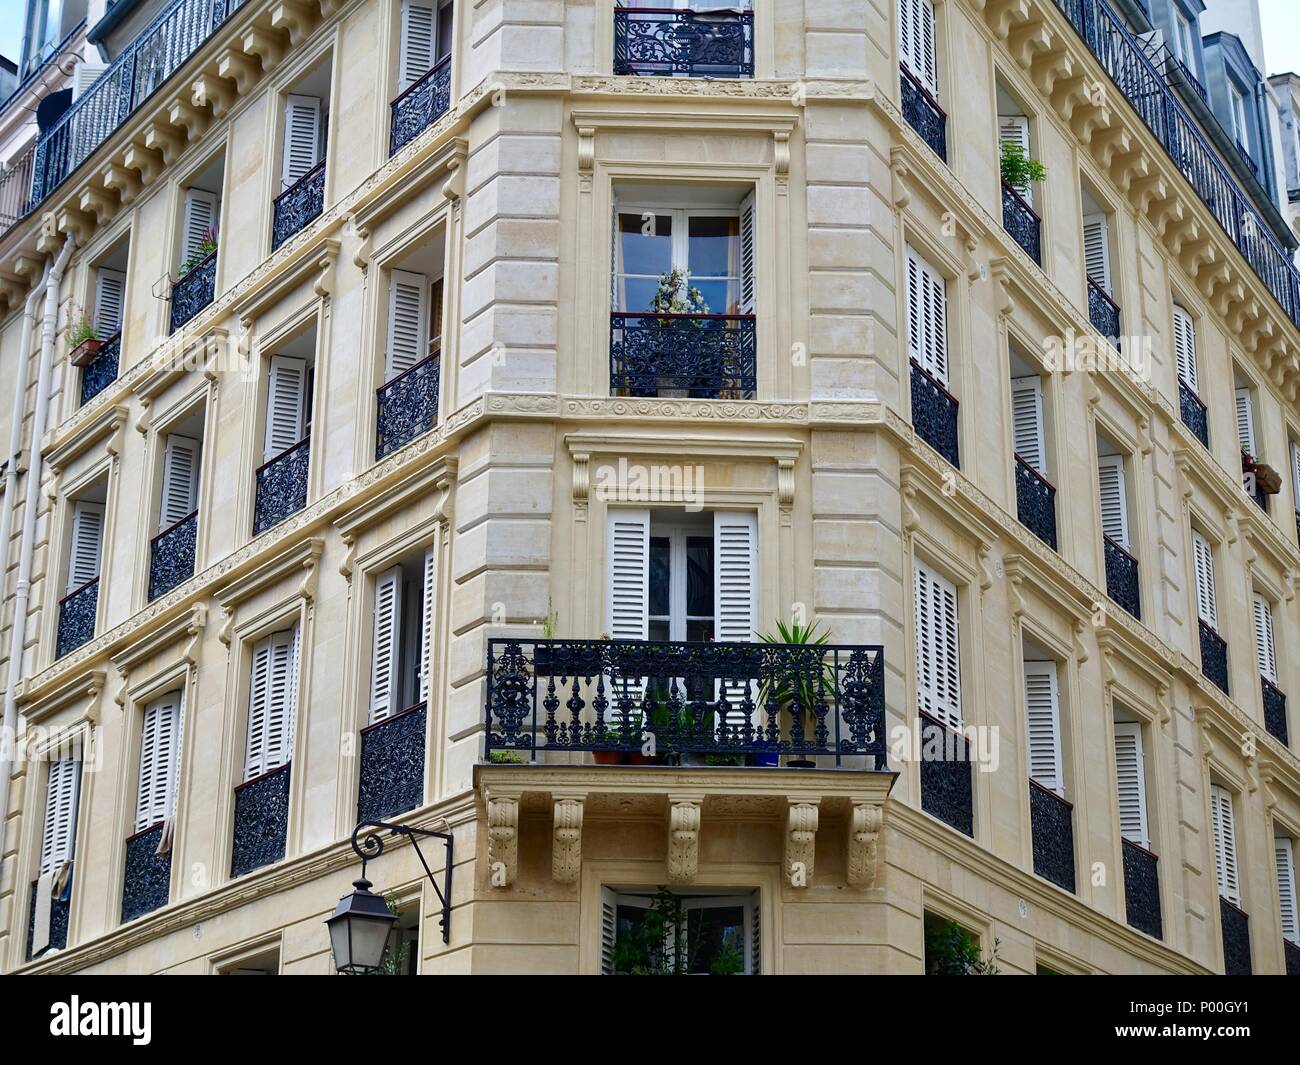 Paris balcony - images photography Alamy hi-res and stock